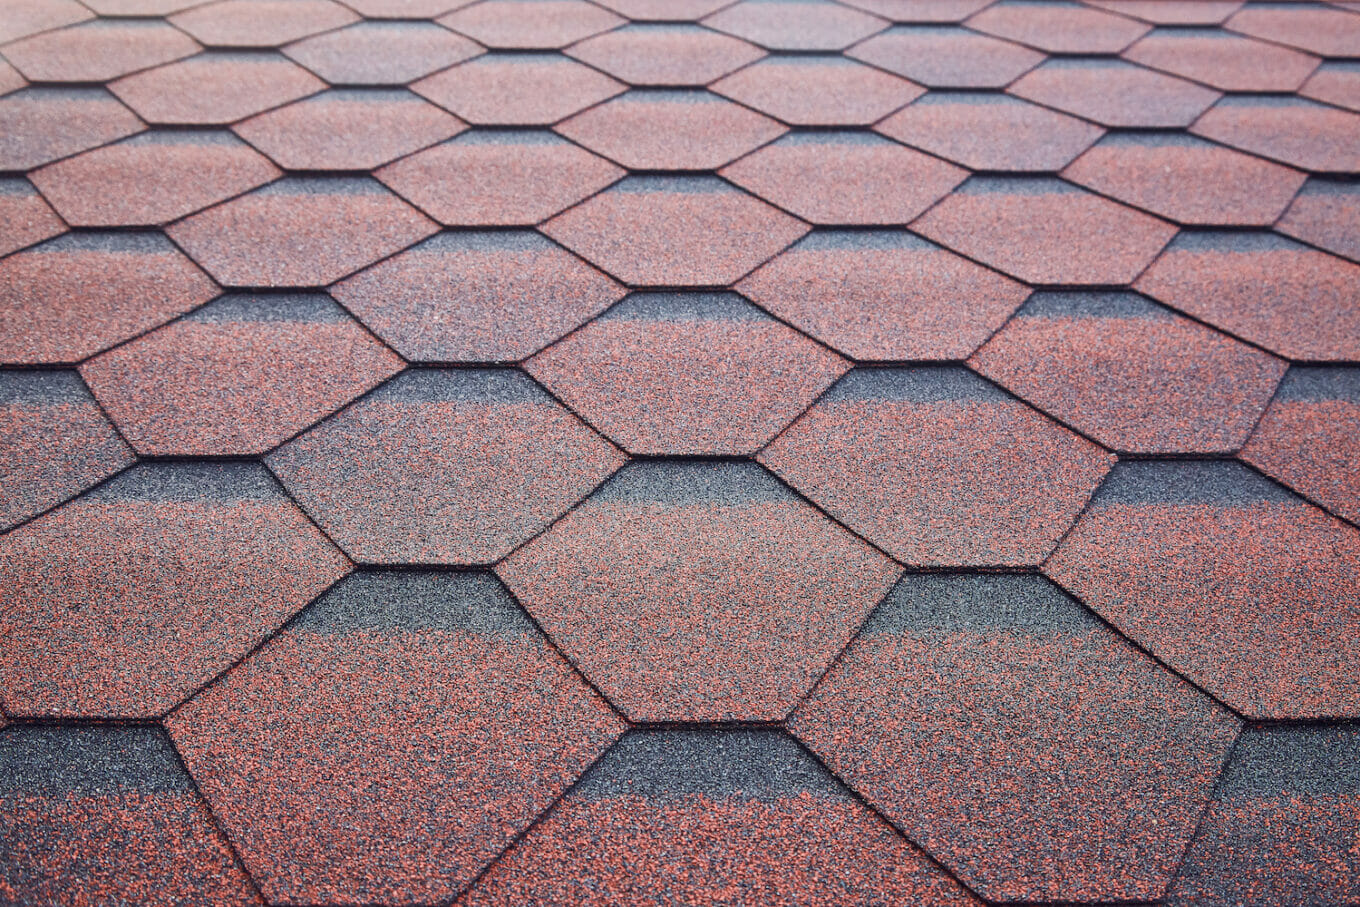 davinci roof cost red roofing tiles 